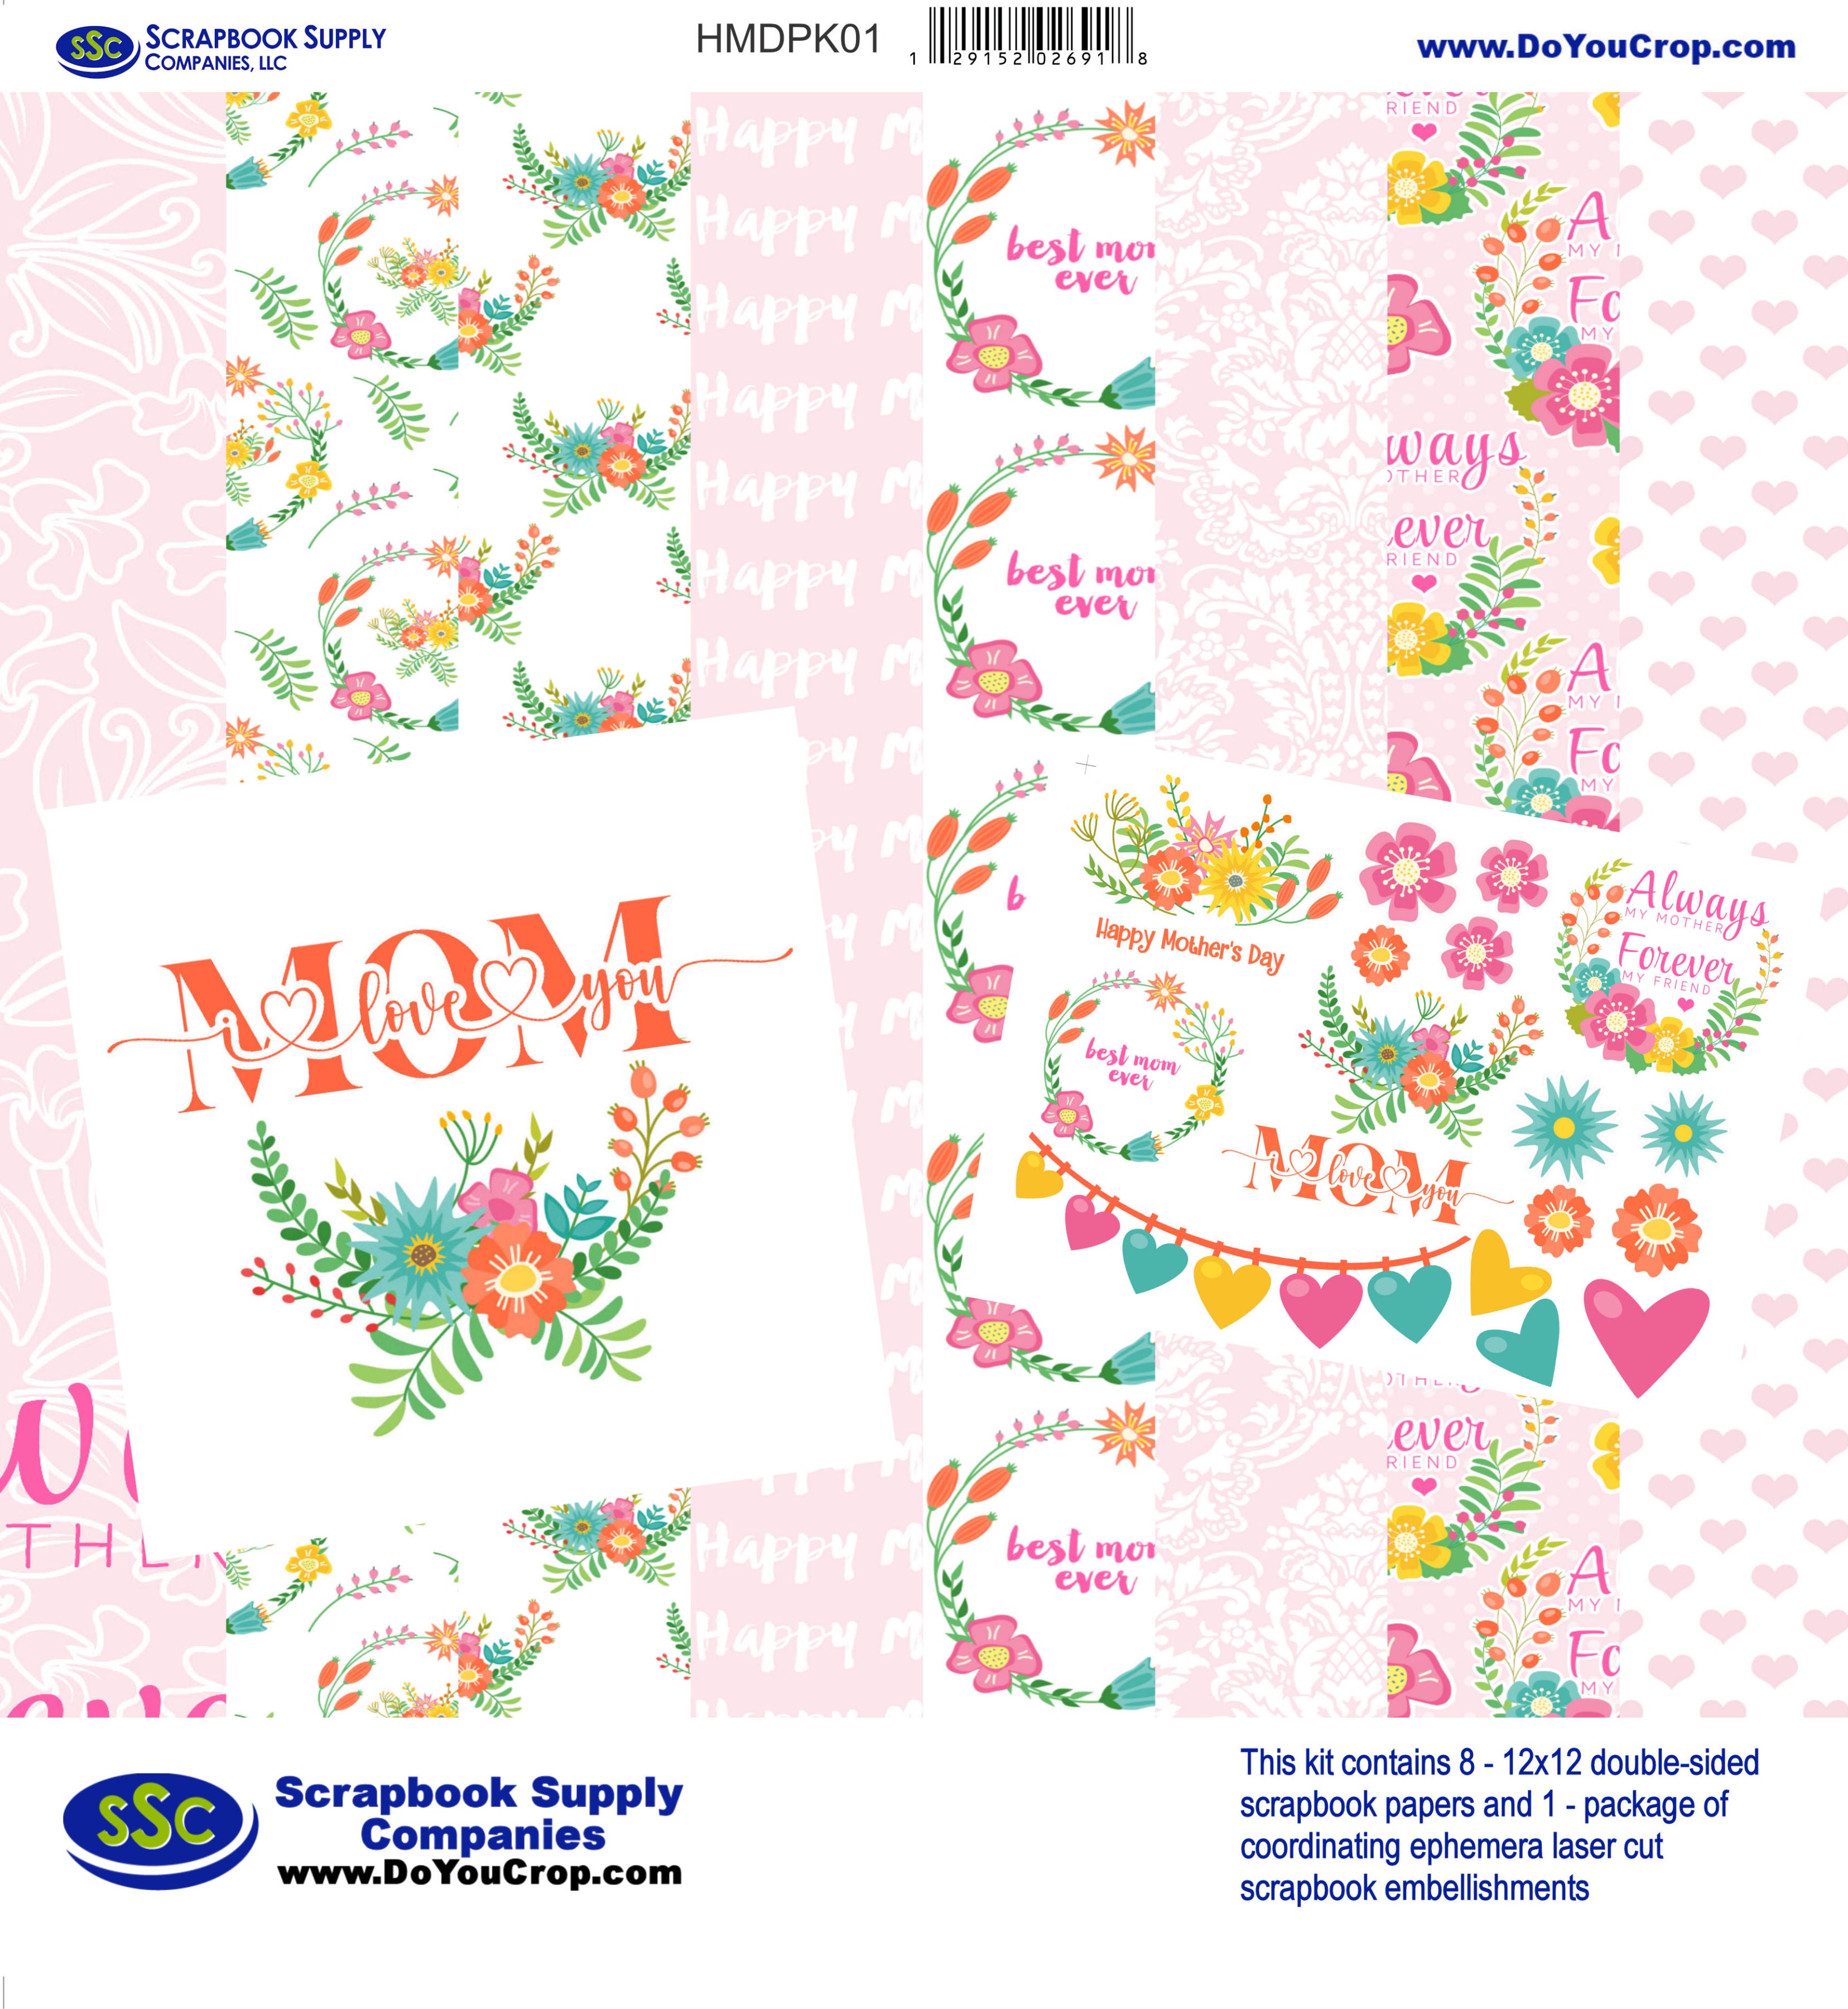 Happy Mother's Day 12 x 12 Scrapbook Paper & Embellishment Kit by SSC Designs